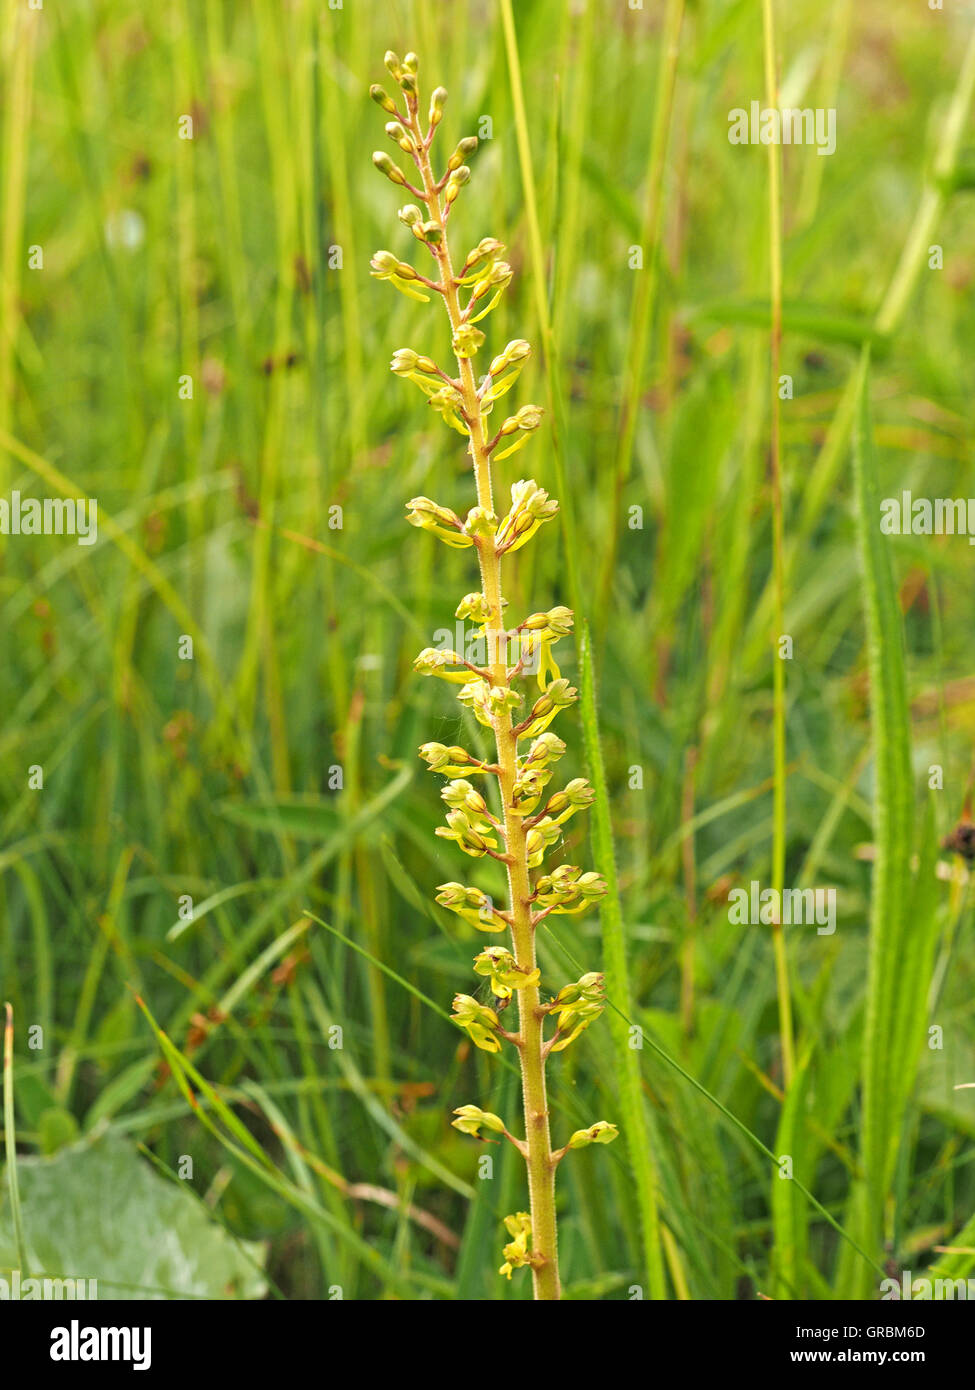 flowering spike of Common Twayblade Orchid (Listera ovata) in rich diverse grassy roadside verge Stock Photo